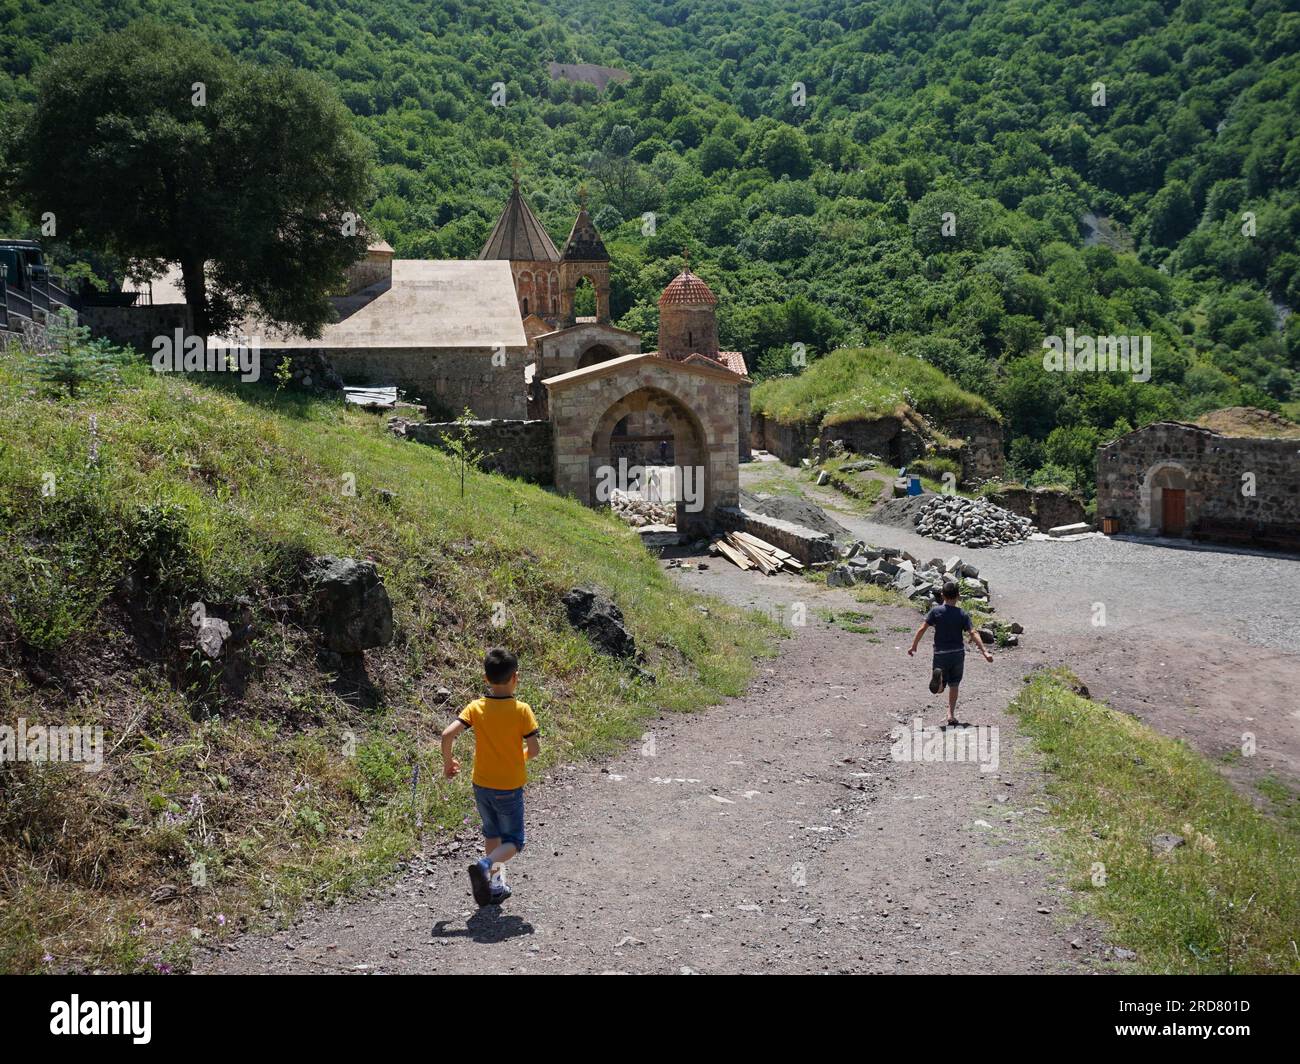 Children seen running outside the Dadivank, an Armenian Apostolic monastery, in Kalbajar, Nagorno-Karabakh. The unrecognised yet de facto independent country in South Caucasus, Nagorno-Karabakh (also known as Artsakh) has been in the longest-running territorial dispute between Azerbaijan and Armenia in post-Soviet Eurasia since the collapse of Soviet Union. It is mainly populated by ethnic Armenians. Stock Photo